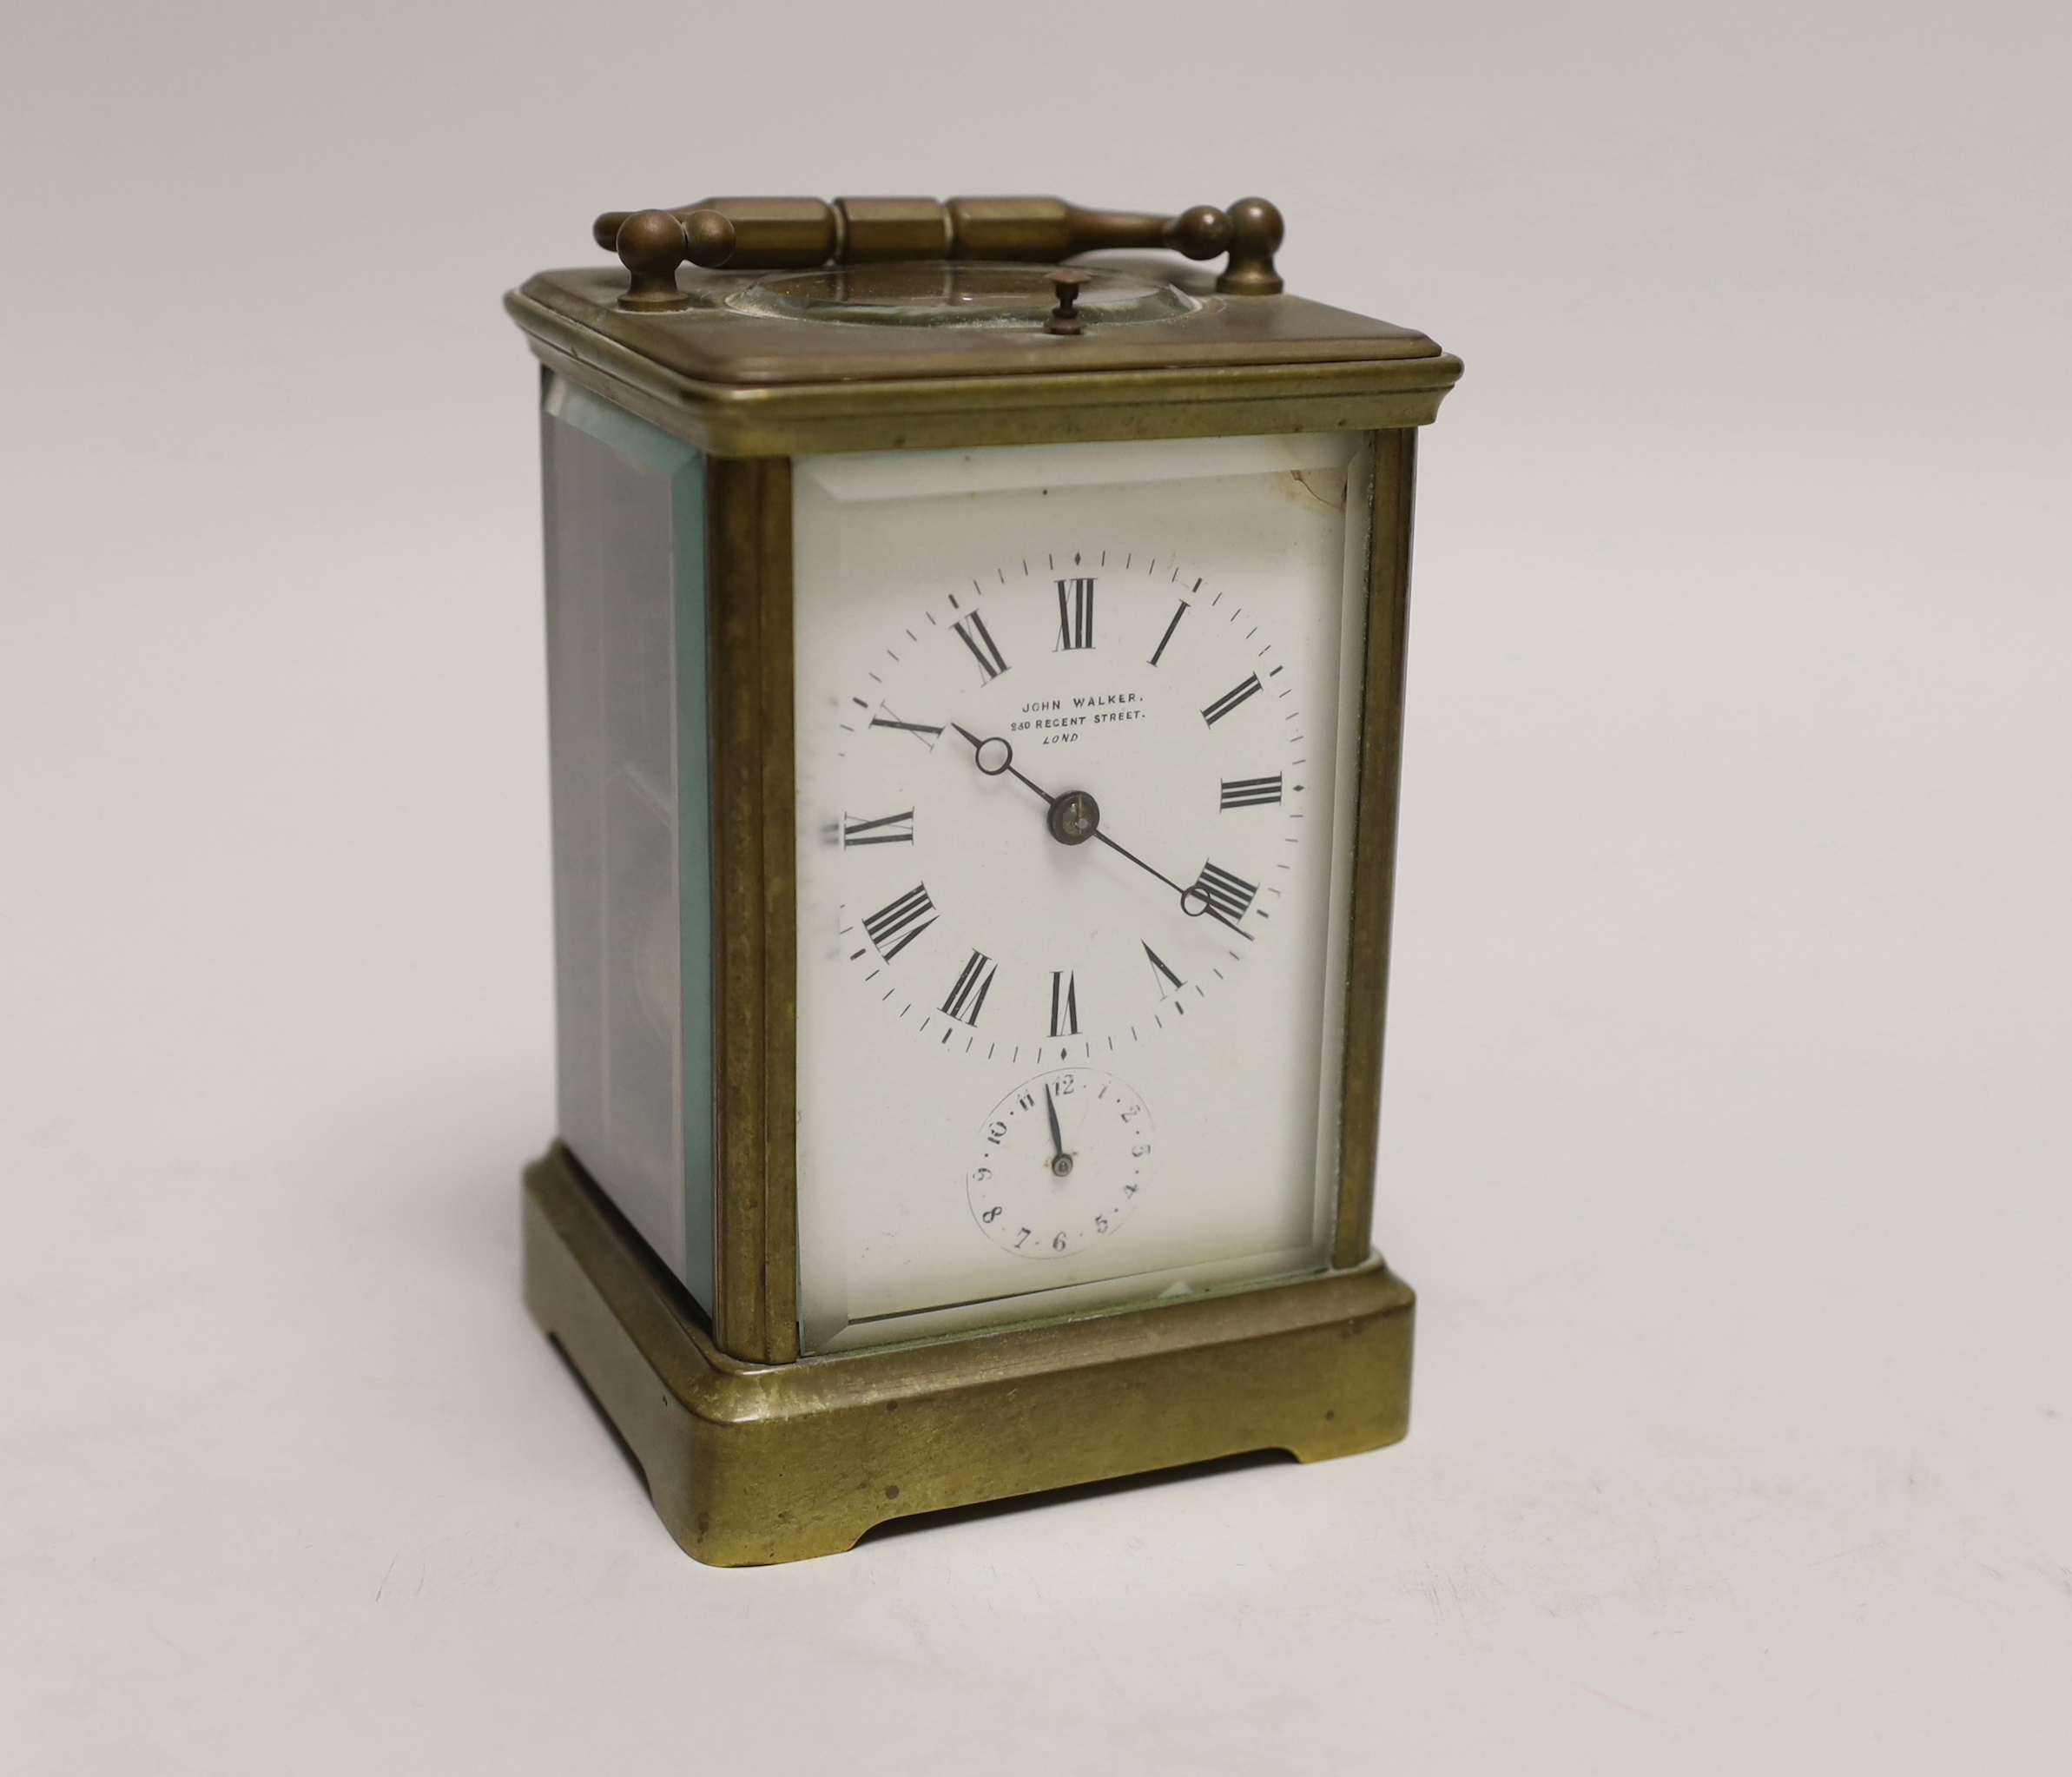 A repeating carriage clock with alarm dial, movement signed for Charles Vincenti, with retailer John